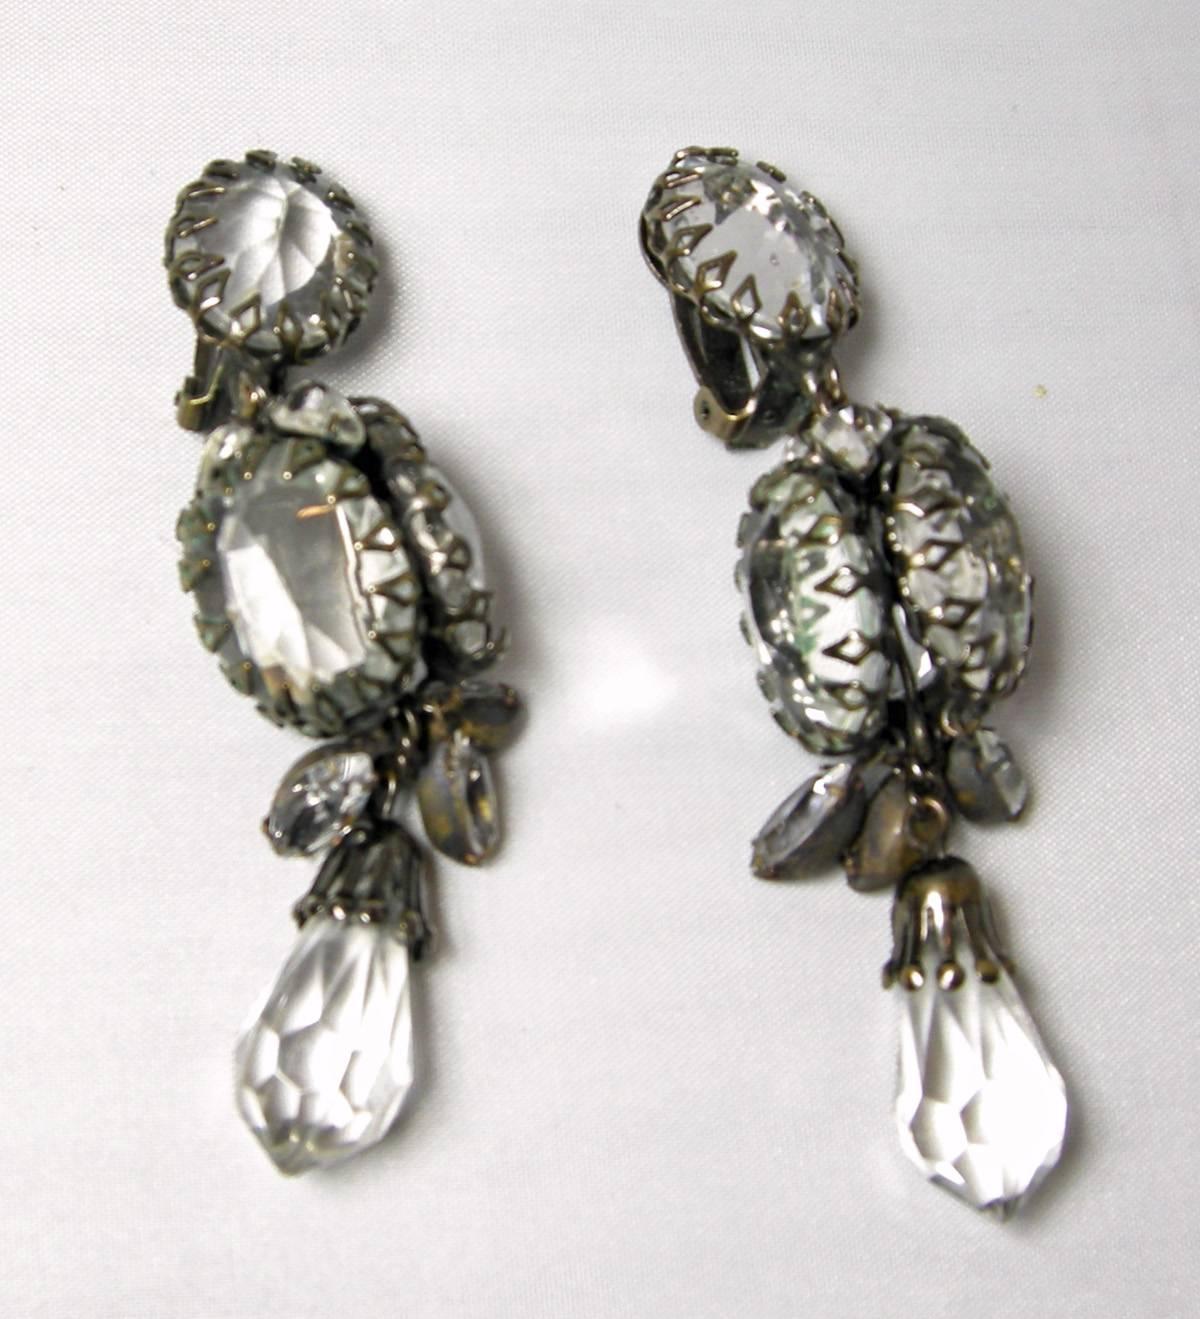 I fell in love with these long drop earrings.  The top has a large pronged oval crystal, which is connected to three tear-shaped crystals leading to three more oval crystals creating a 3-dimensional dome.  Three more crystals hang down to a capped